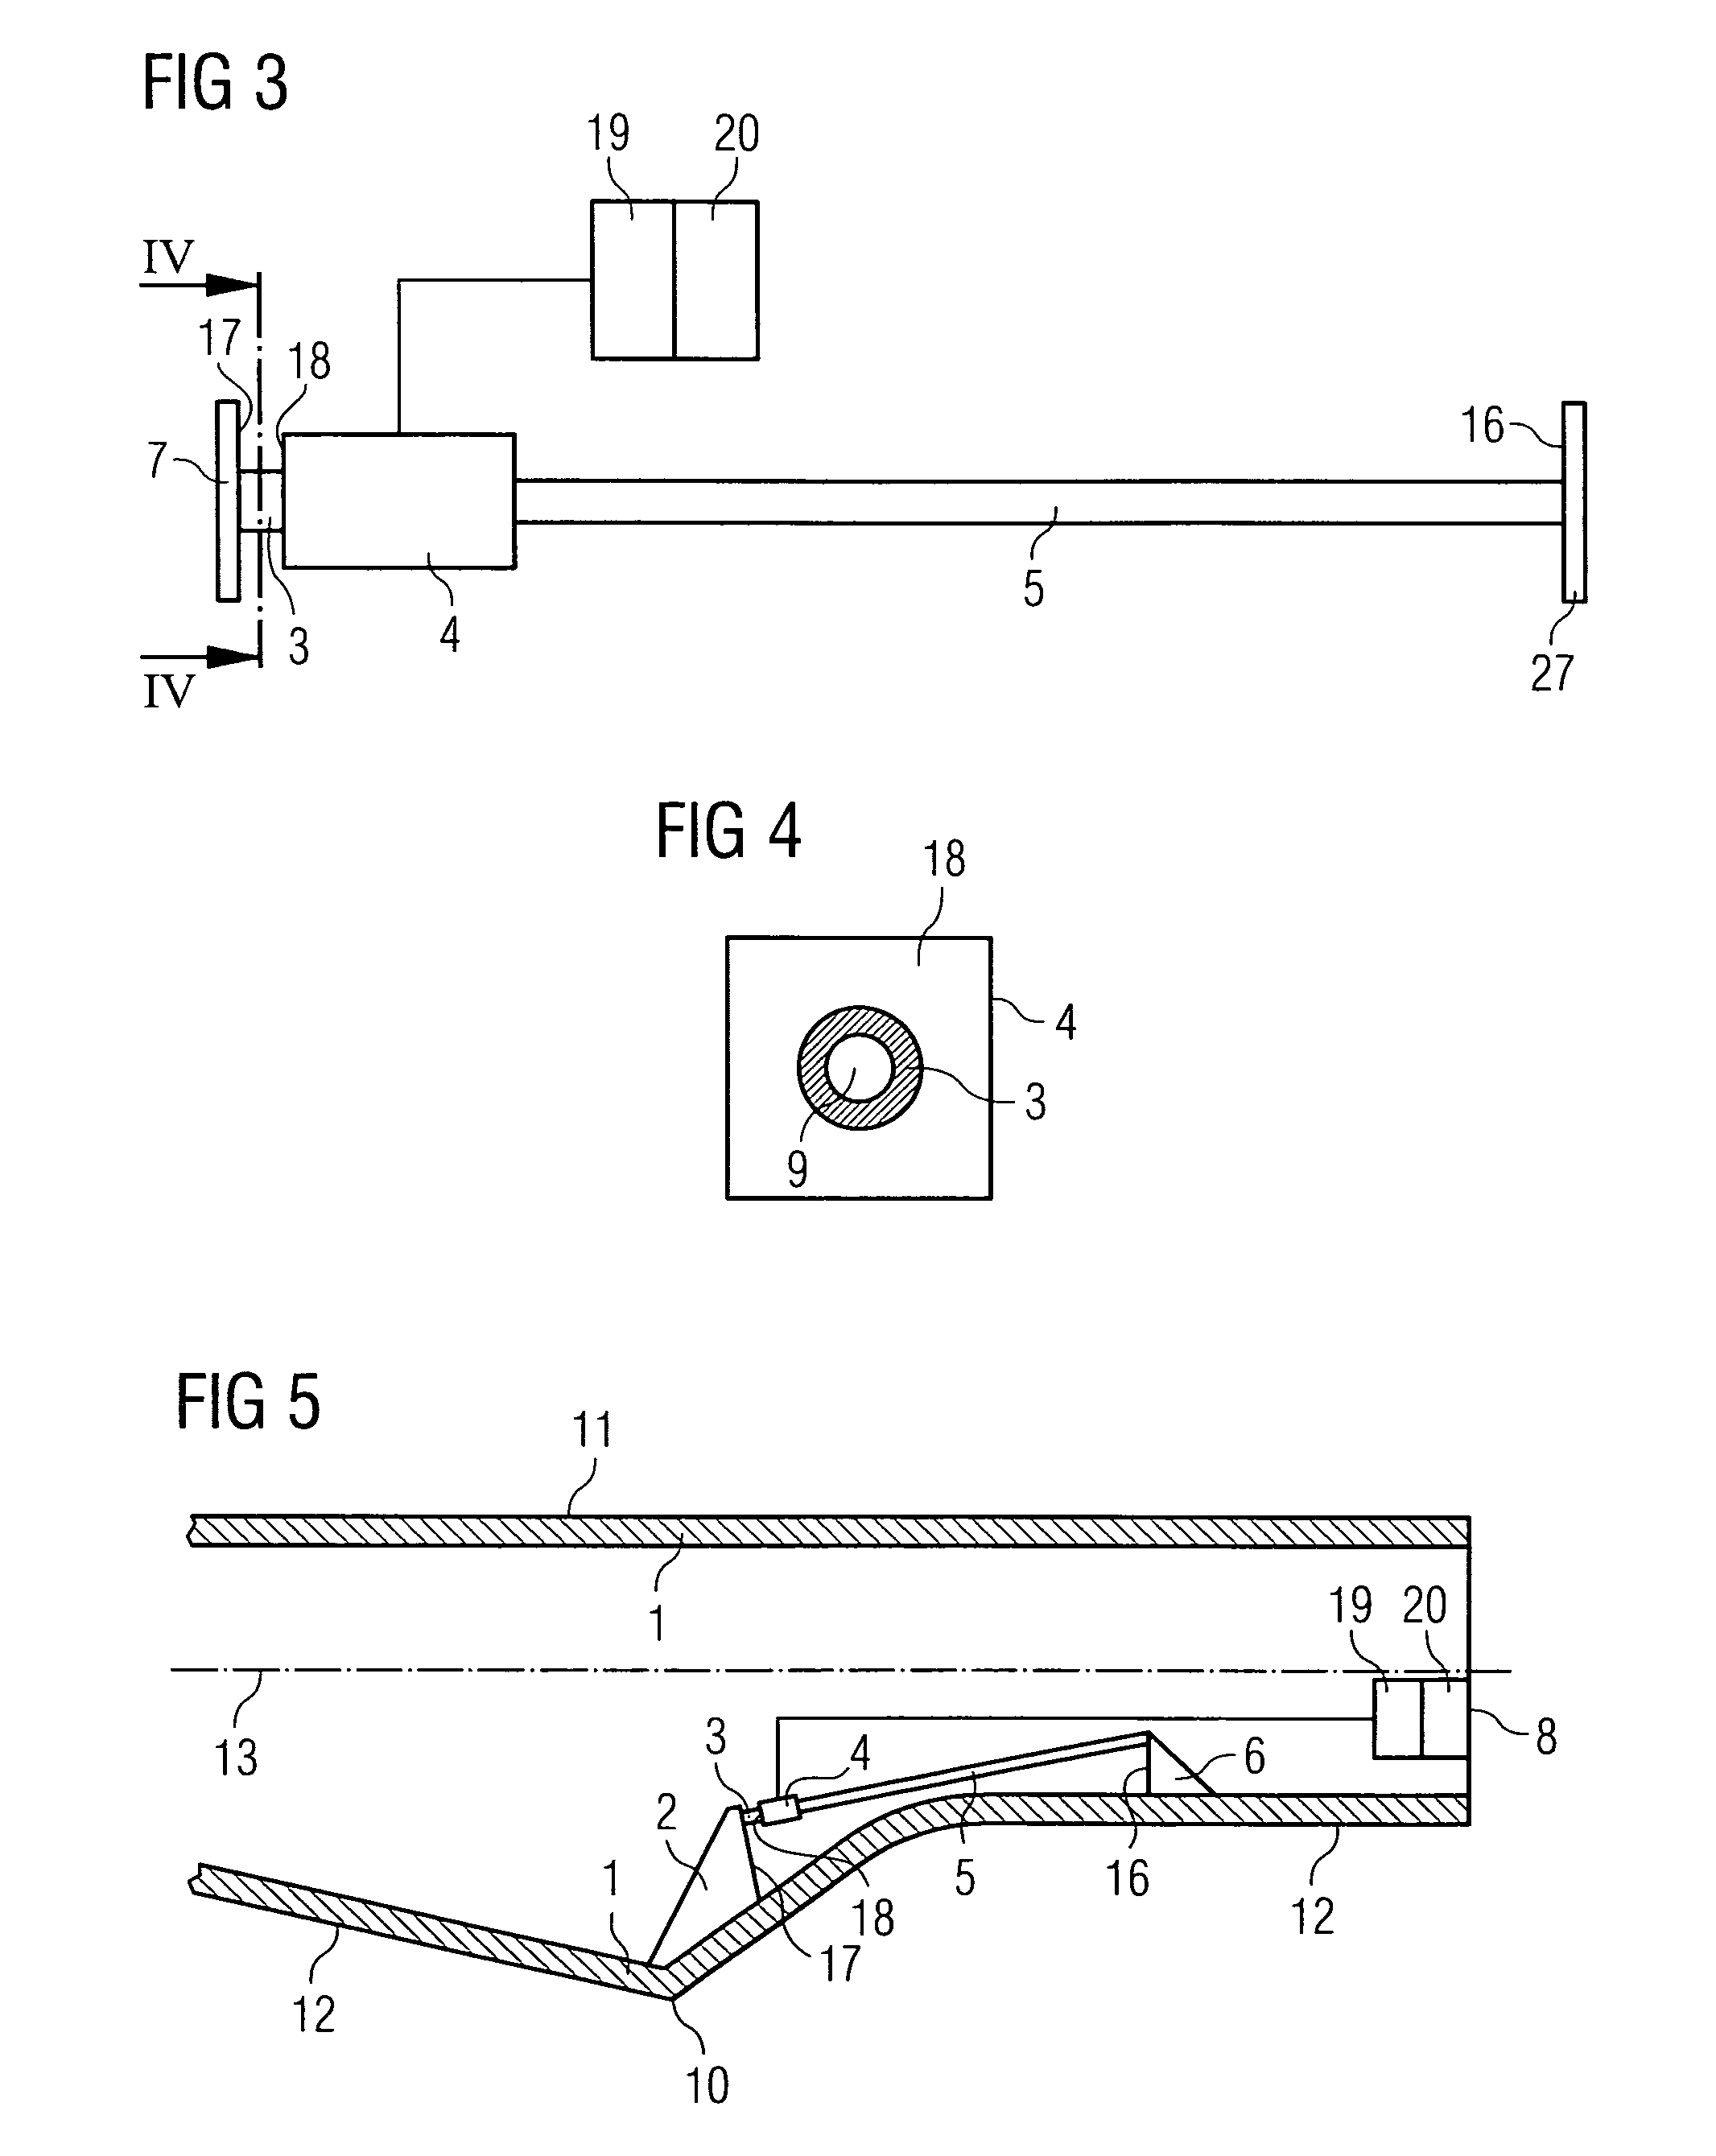 Method and sensor setup for determination of deflection and/or strain for failure detection